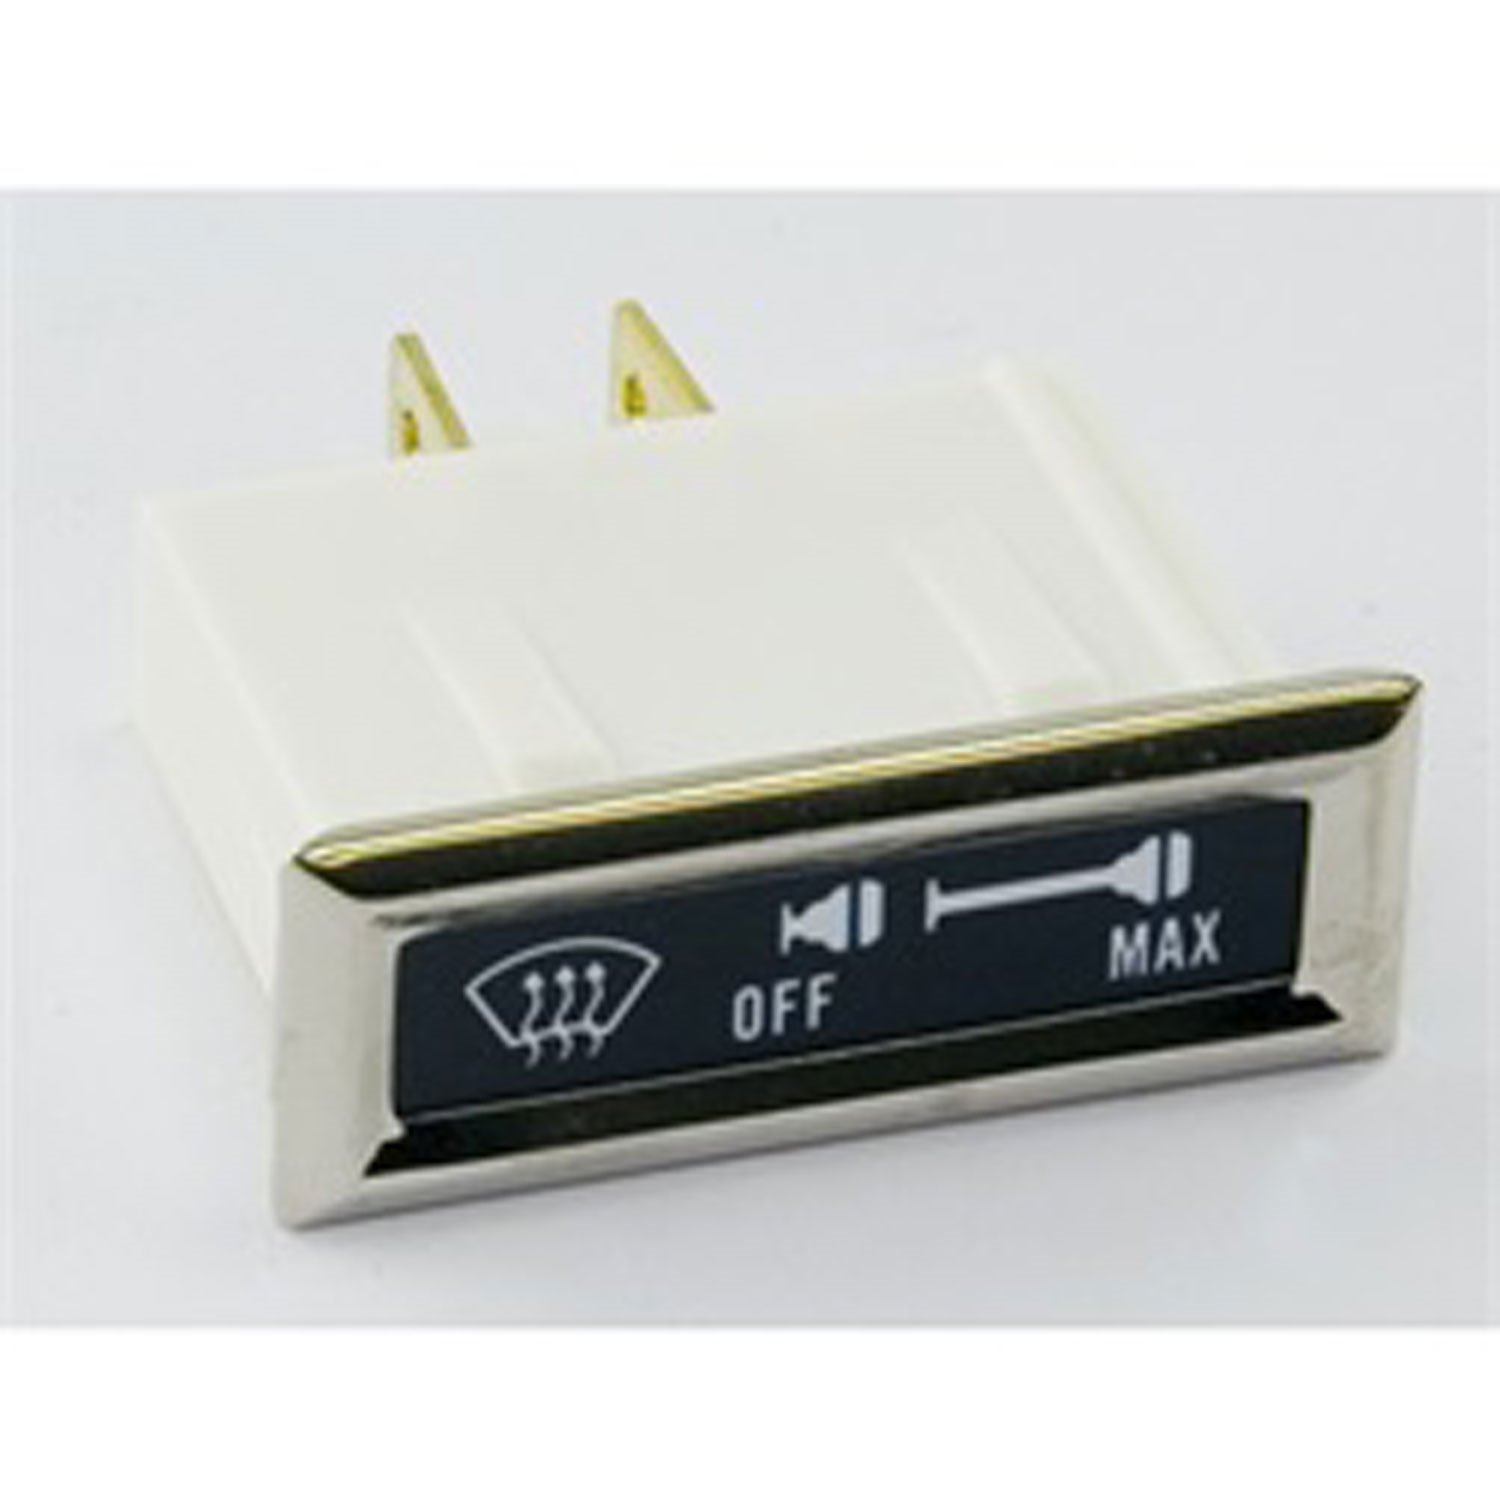 Replacement dash indicator light from Omix-ADA is for defrost., Fits 76-83 CJ5 76-86 CJ7 and 81-86 CJ8